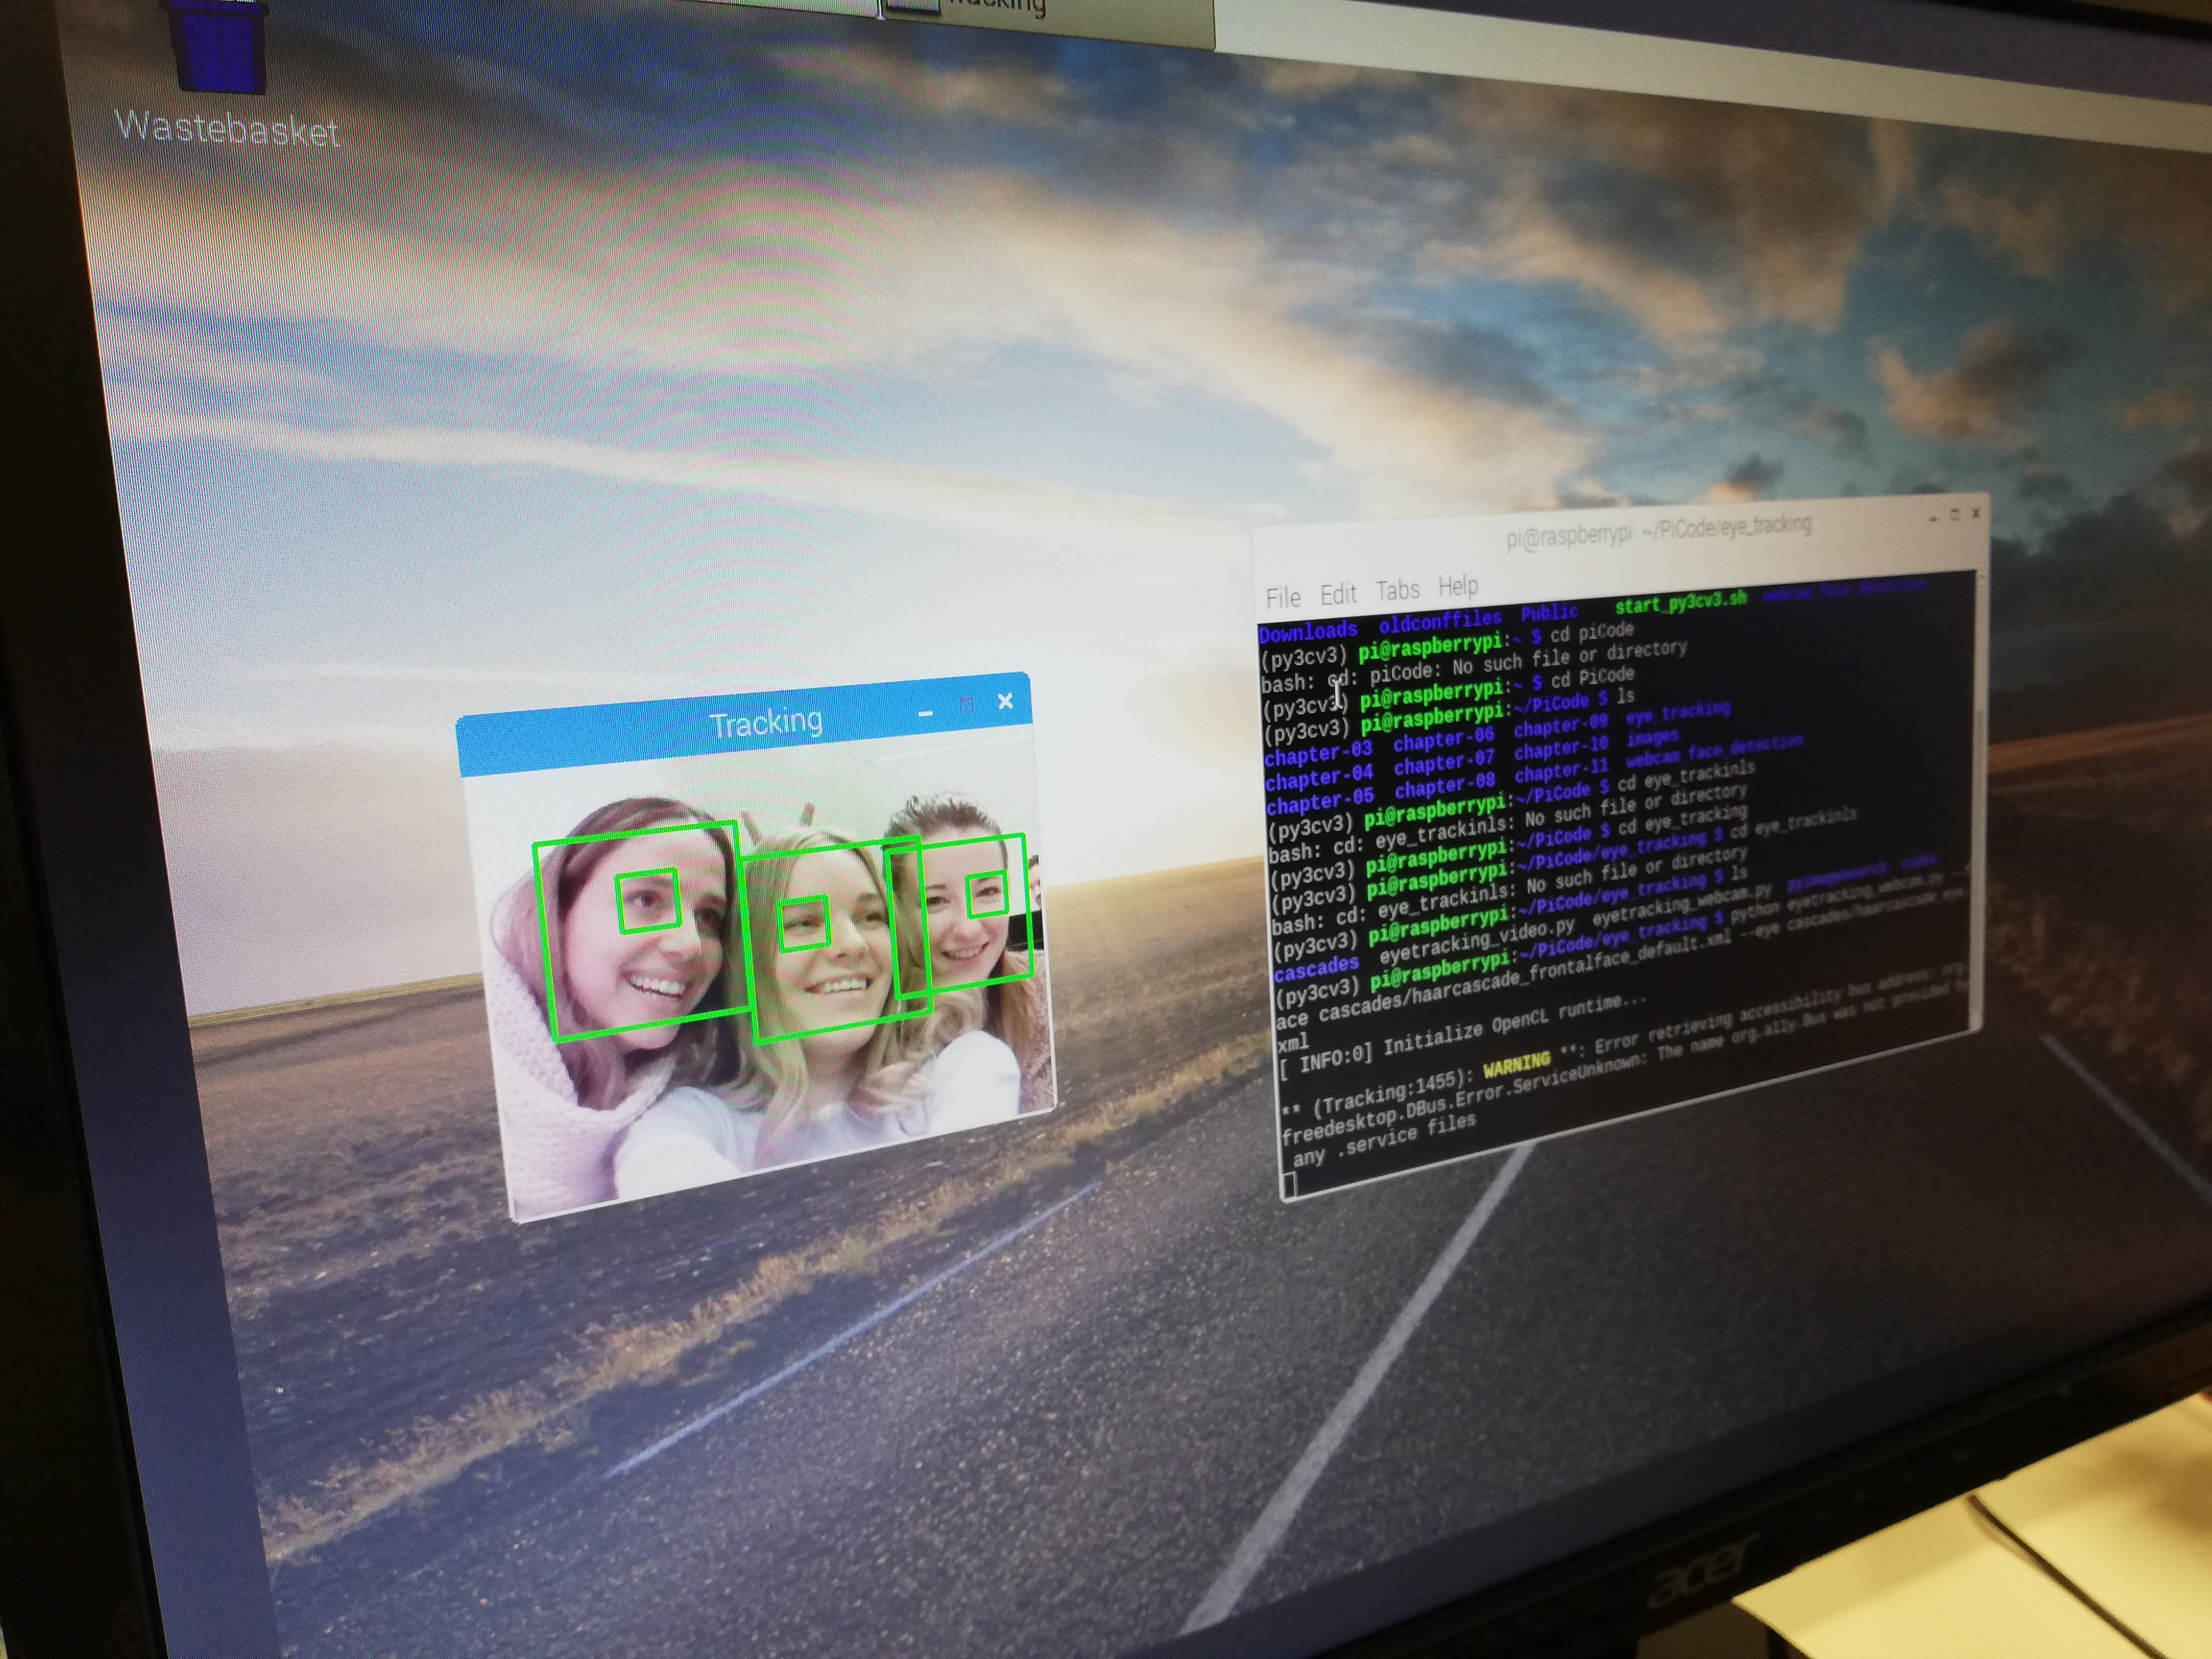 Face recognition using Raspberry Pies